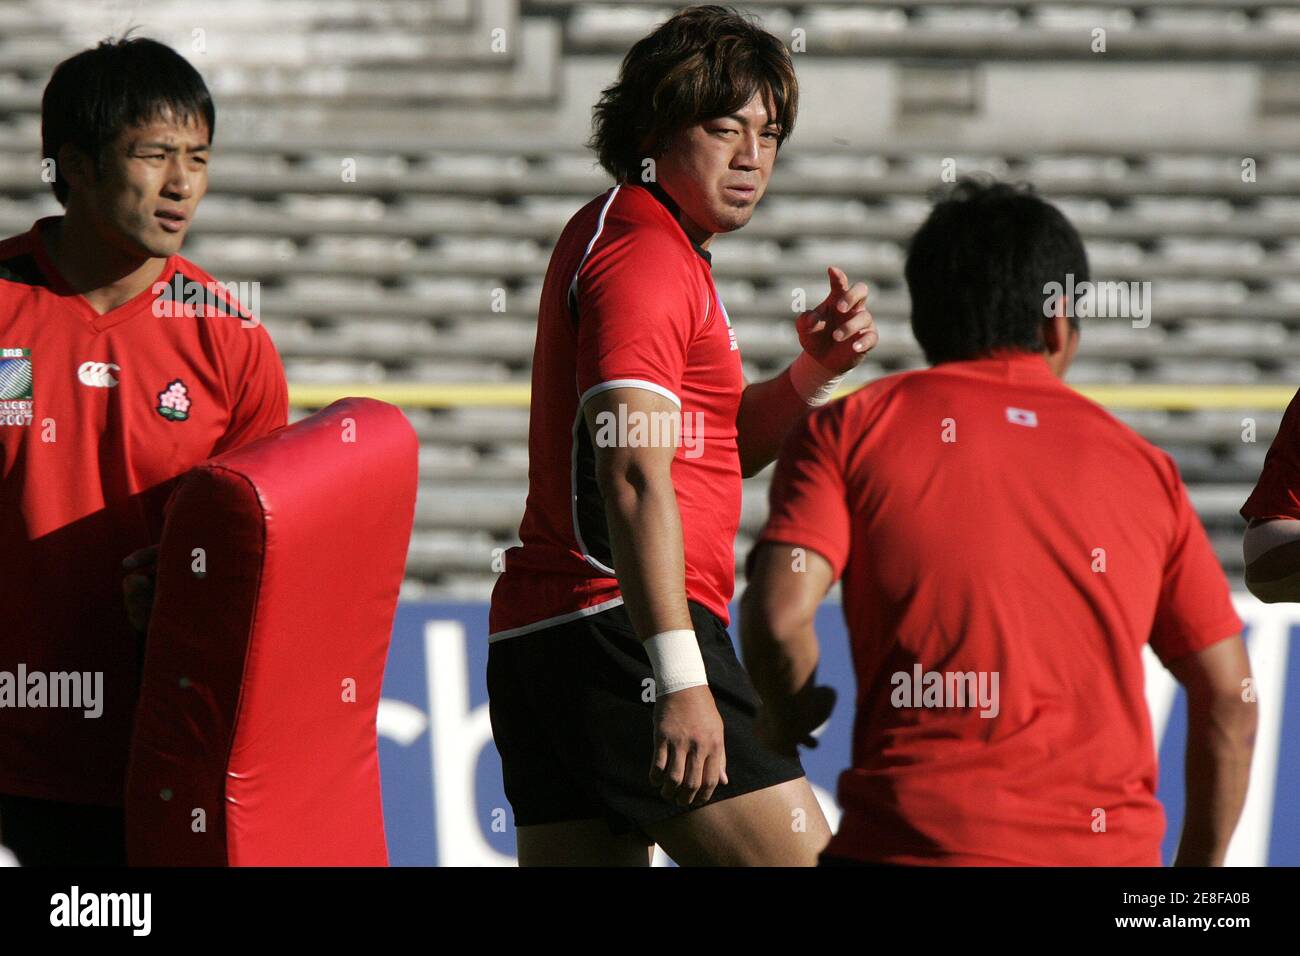 Japan's rugby team captain Takuro Miuchi (C) gestures during the Captain's Run rugby training session at Stadium in Toulouse, southwestern France, September 11, 2007. Japan plays in Pool B with Australia, Wales, Fiji and Canada in the Rugby World Cup 2007 REUTERS/Jean-Philippe Arles (FRANCE) Stock Photo